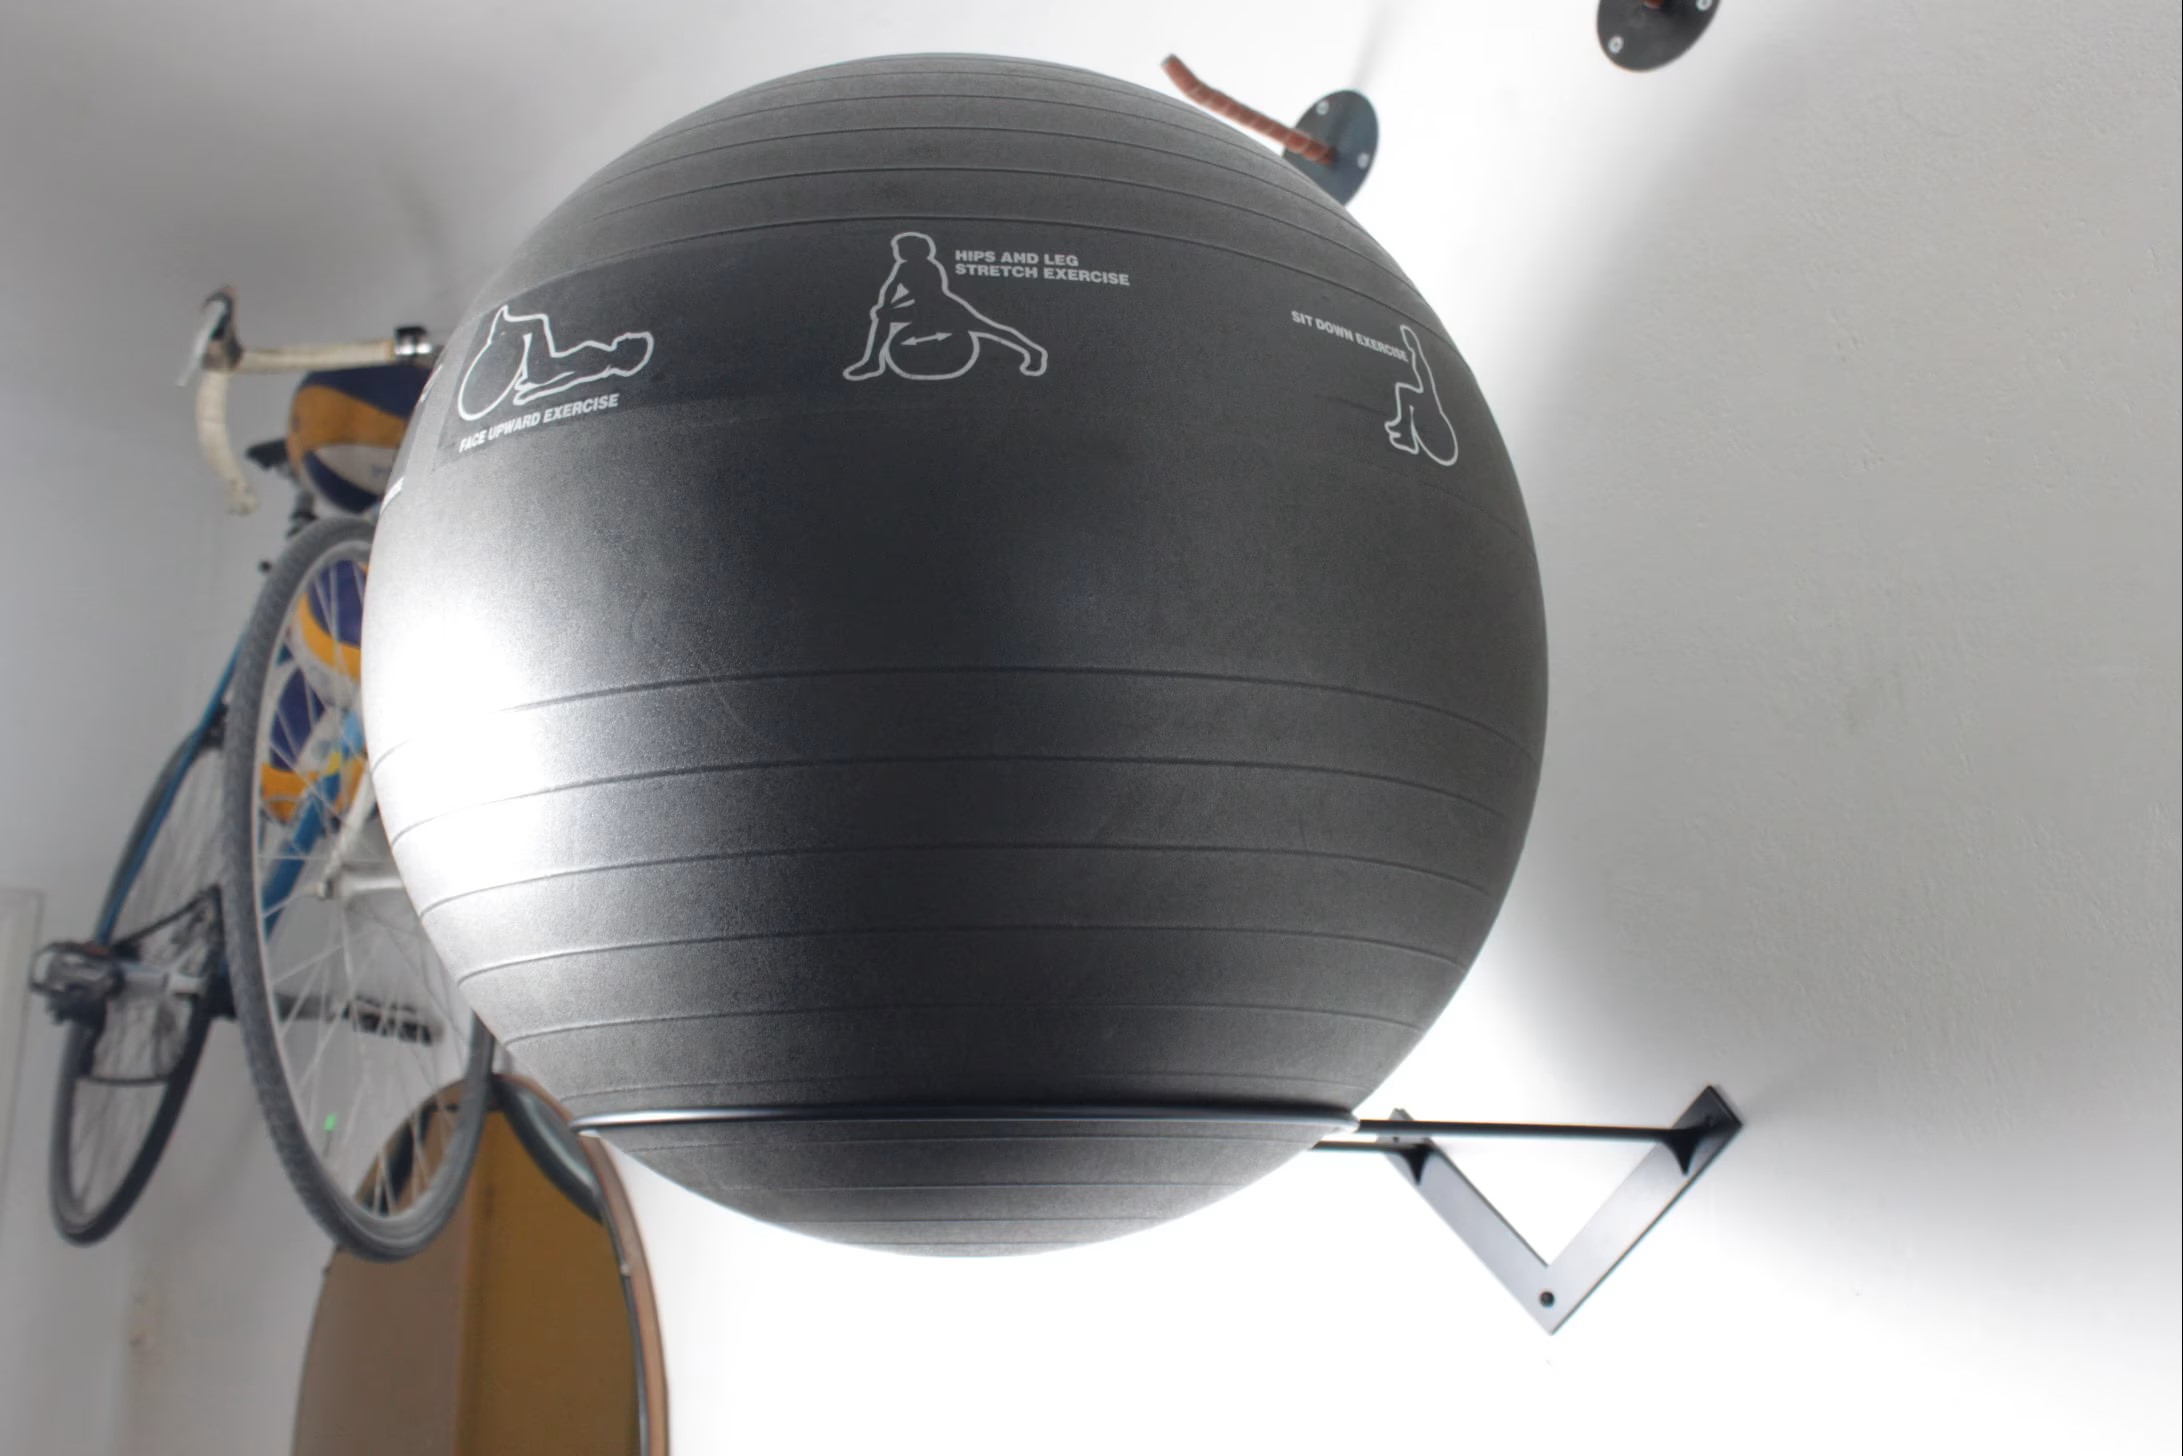 How To Store Exercise Ball